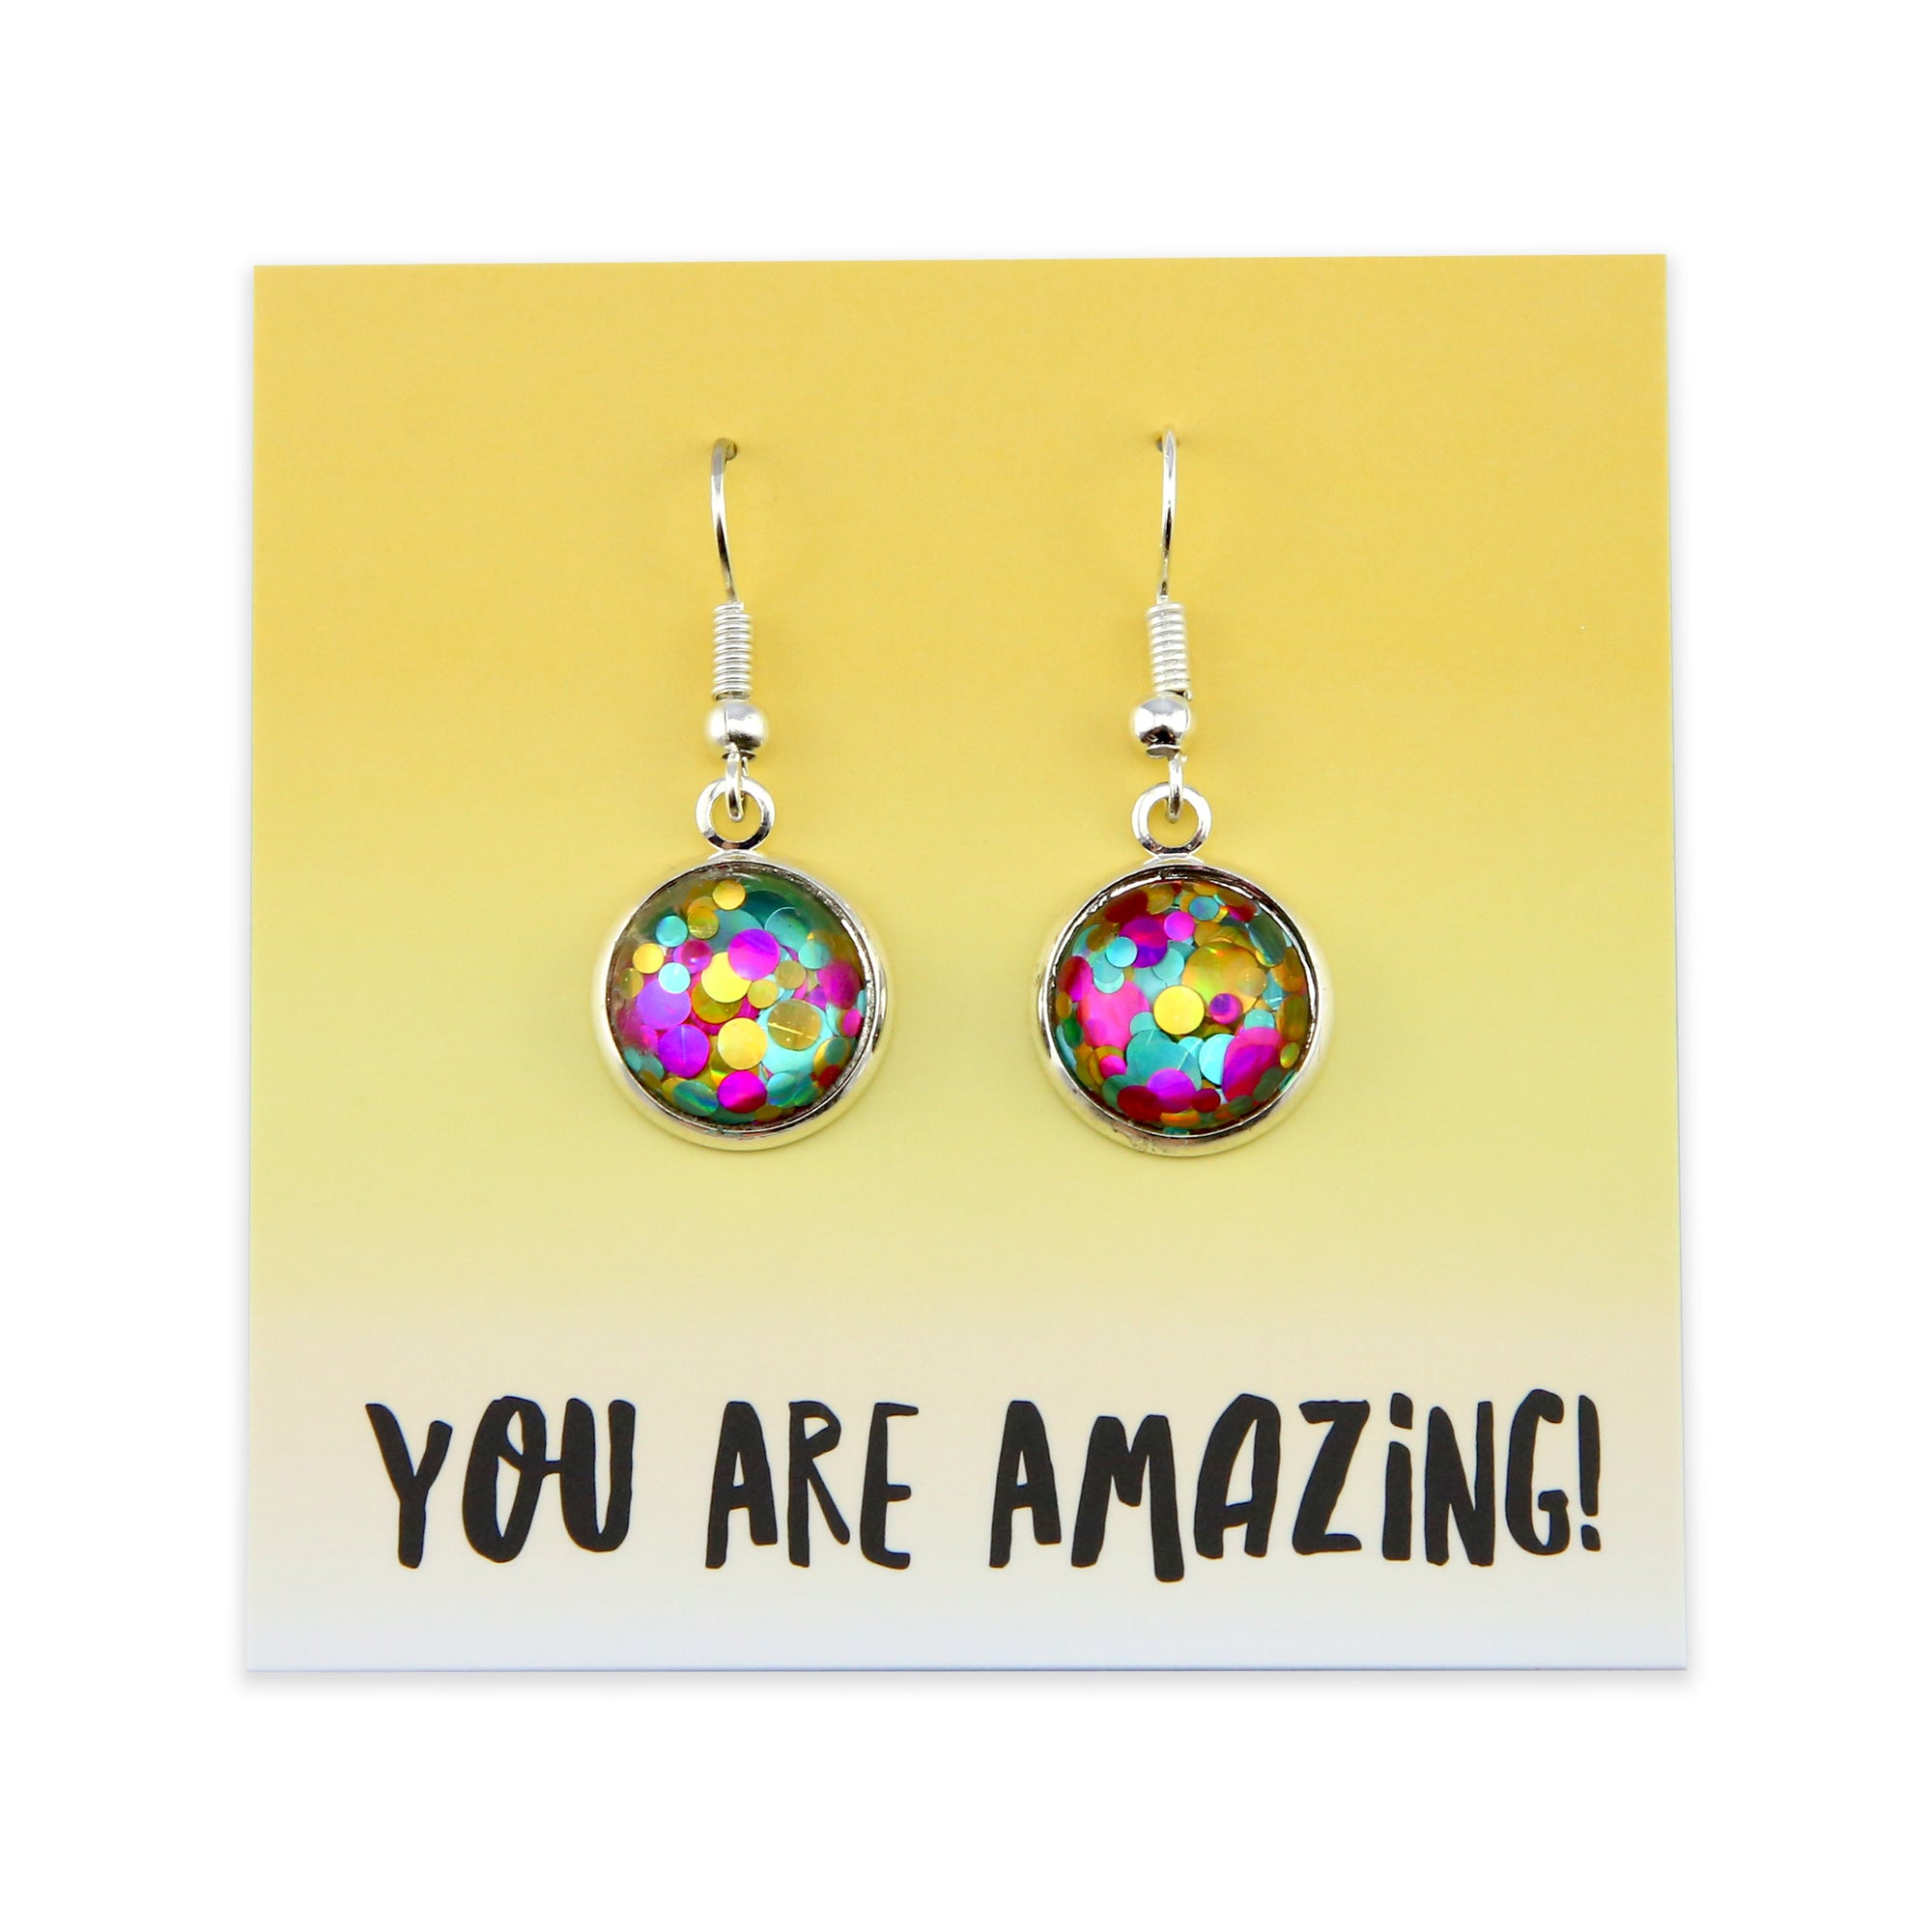 SPARKLEFEST - You Are Amazing - Stainless Steel Bright Silver Dangles - Big Glitter Aqua, Pink & Gold (12125)